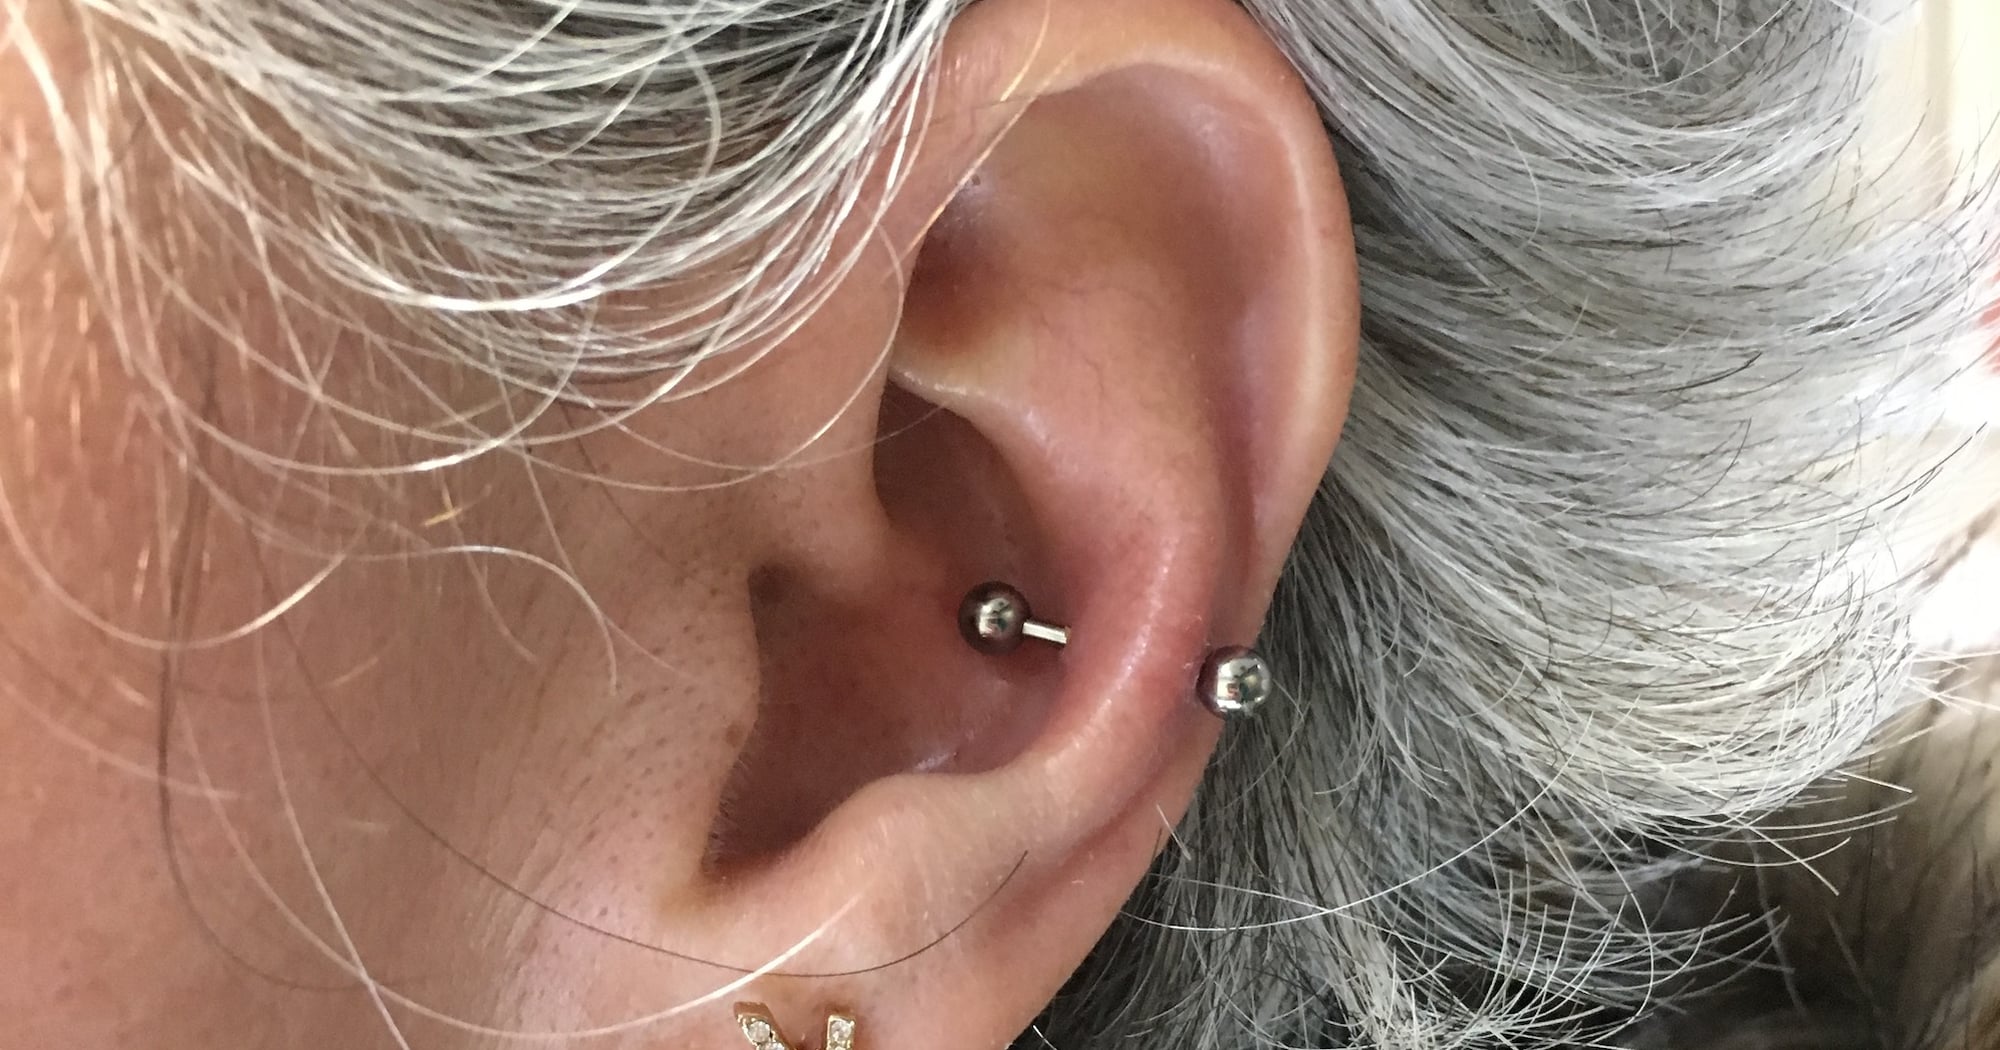 What to Know Before Getting A Snug Piercing: Expert Tips